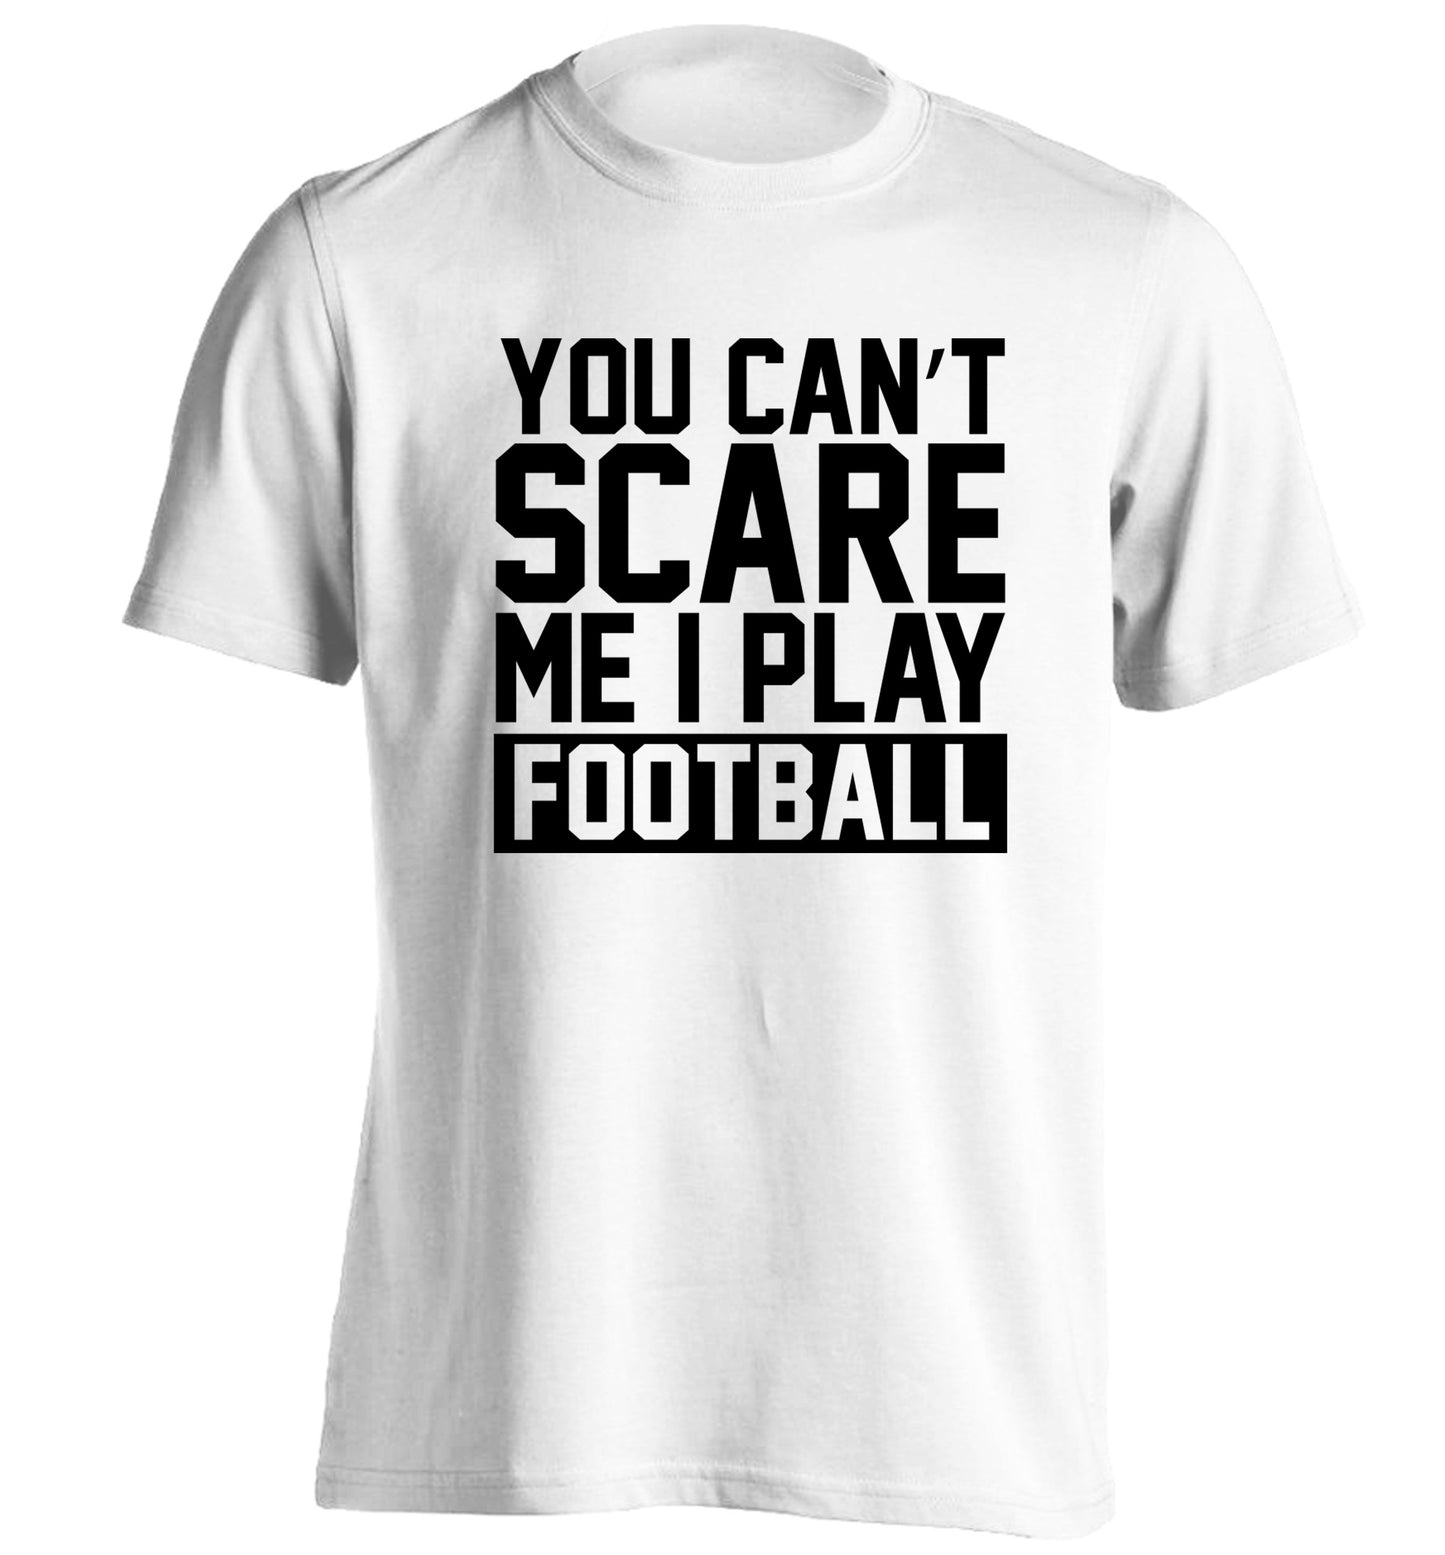 You can't scare me I play football adults unisex white Tshirt 2XL